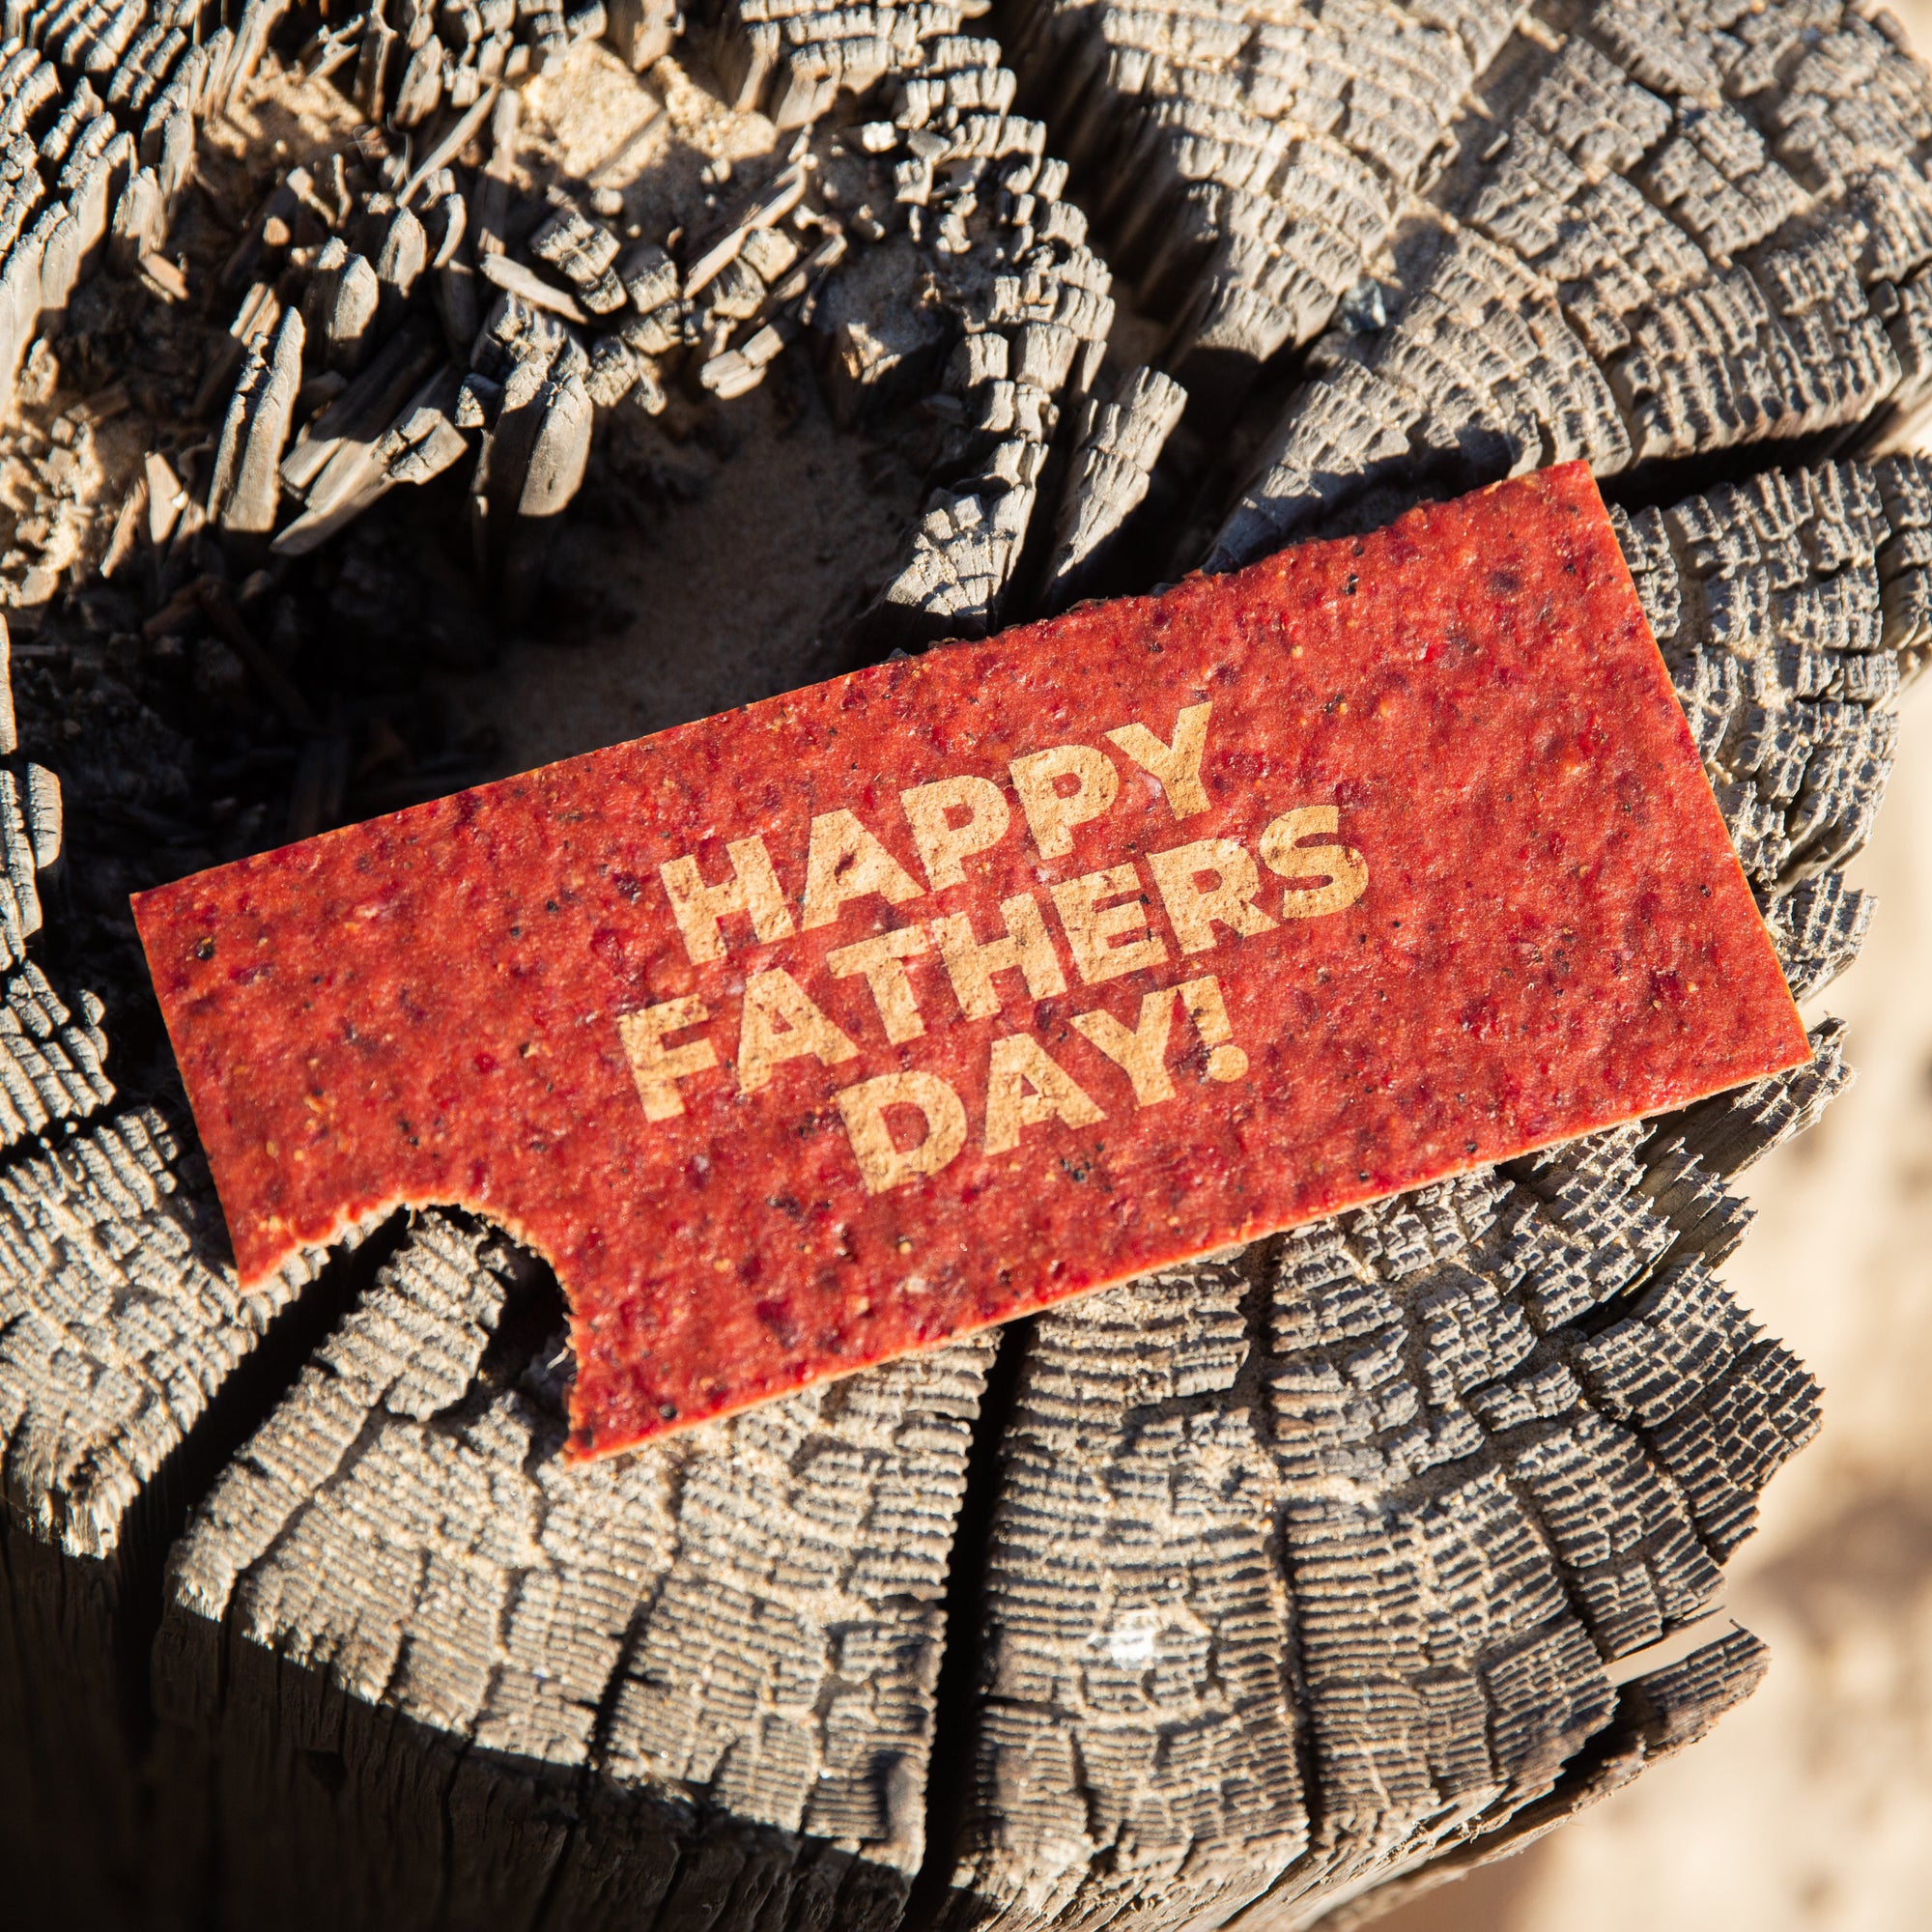 5 Personalized Gift Ideas for Dad That Show You Care